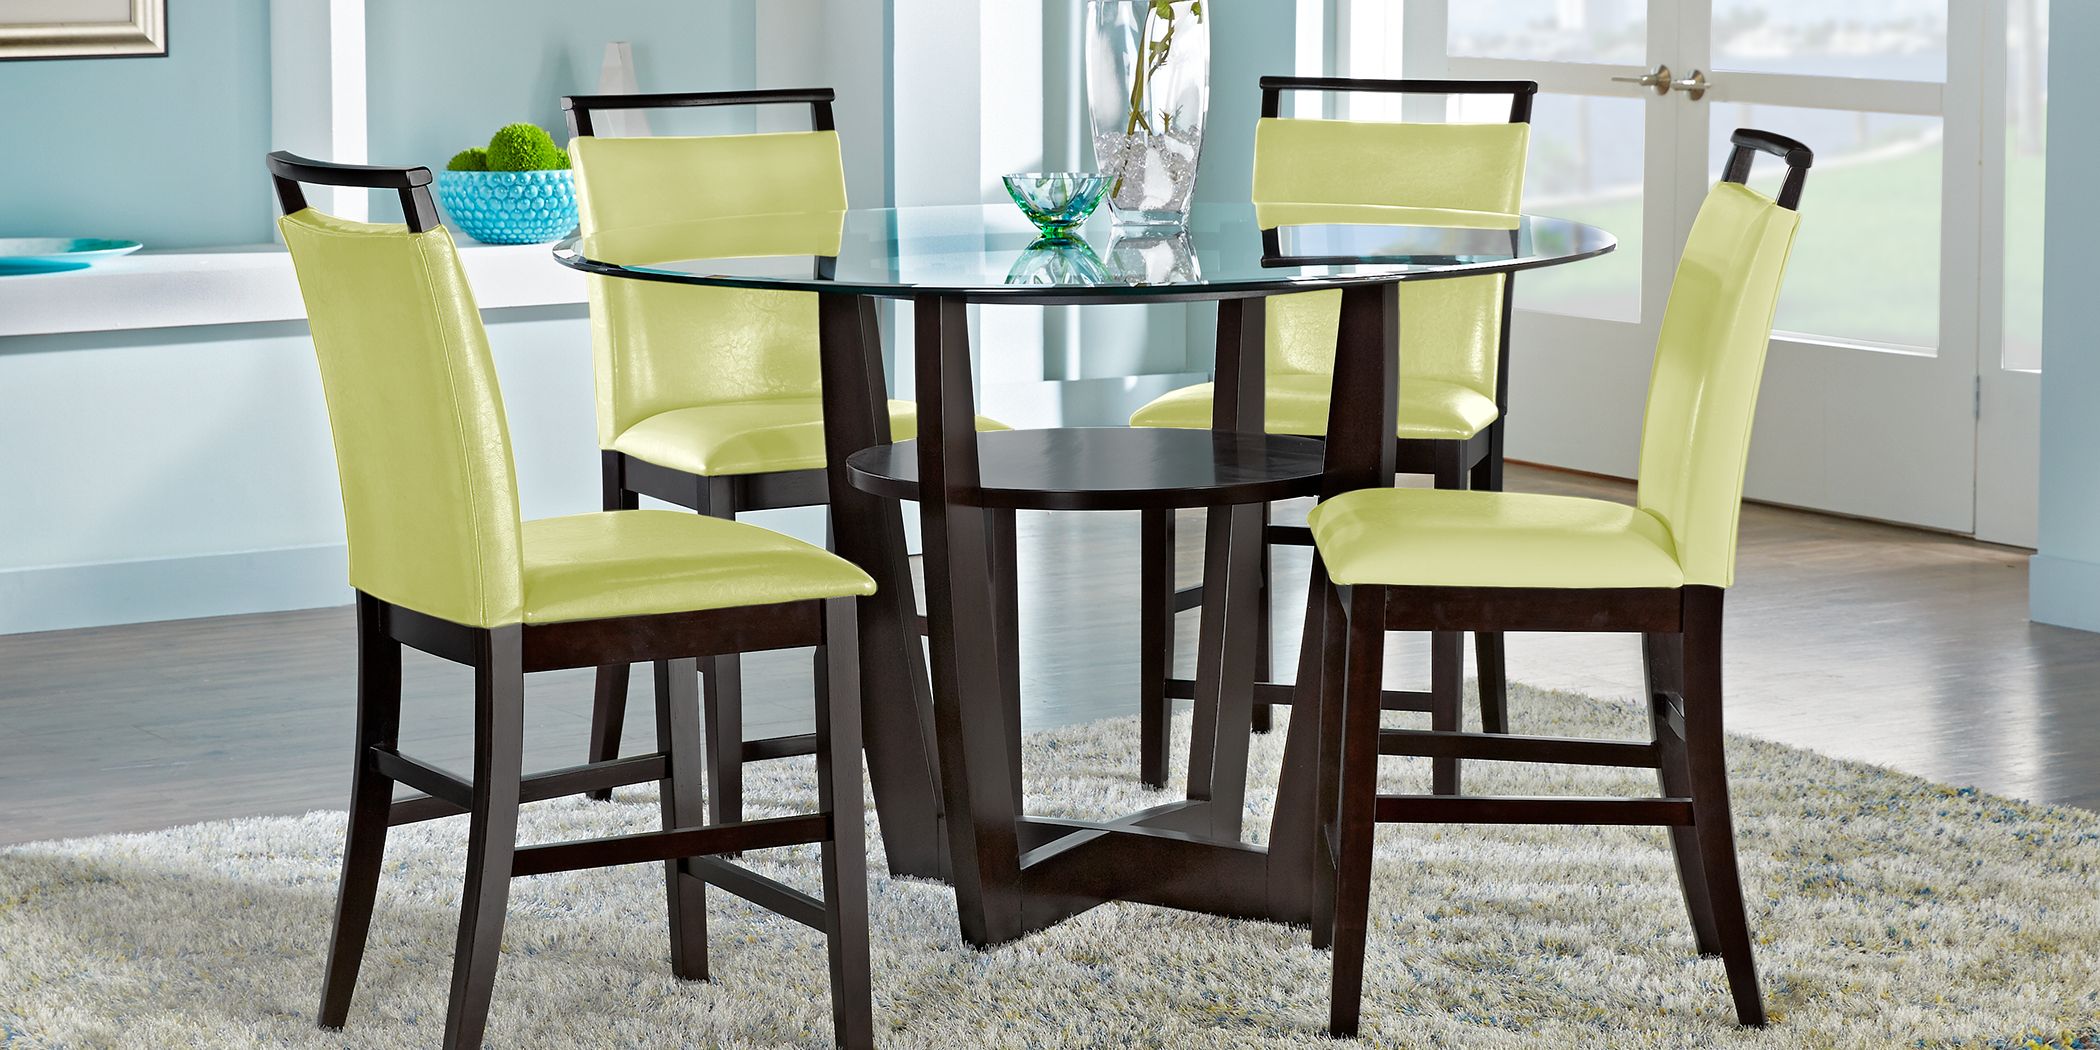 Dining Room Table Chair Sets For, Keegan Espresso Finish Contemporary Dining Room Furniture Set